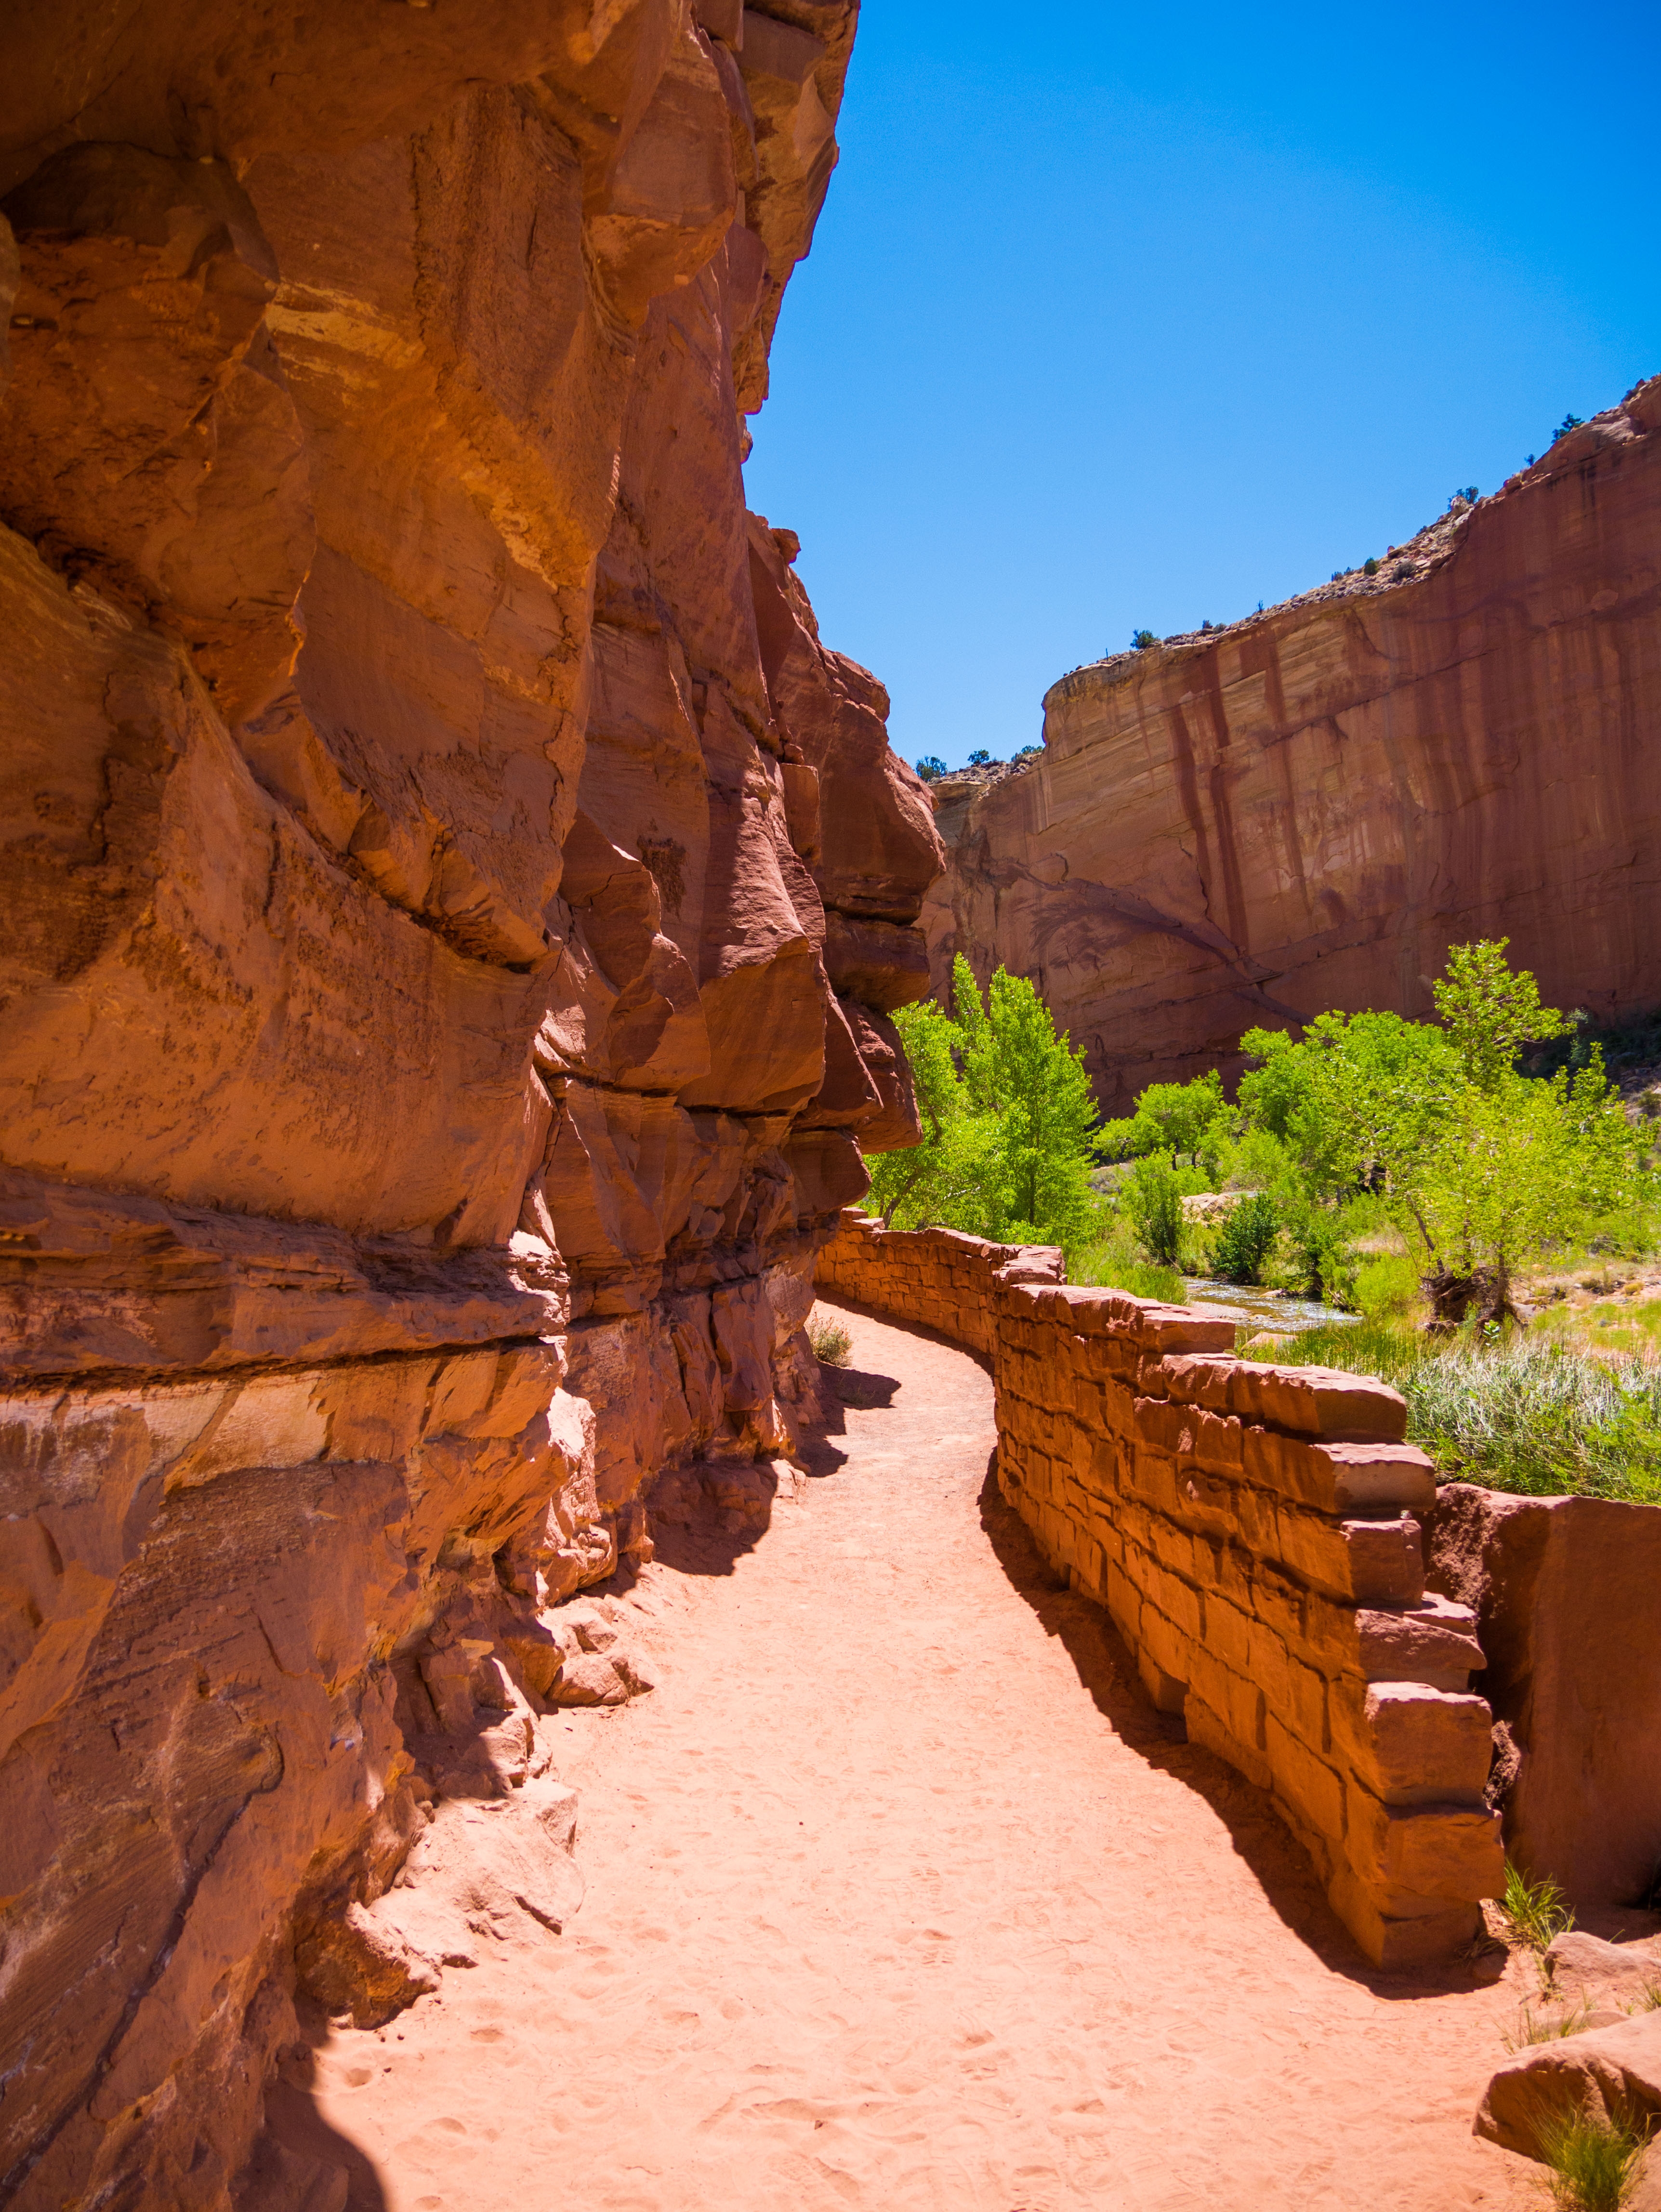 The trail head for Hickman Bridge at Capitol Reef National Park